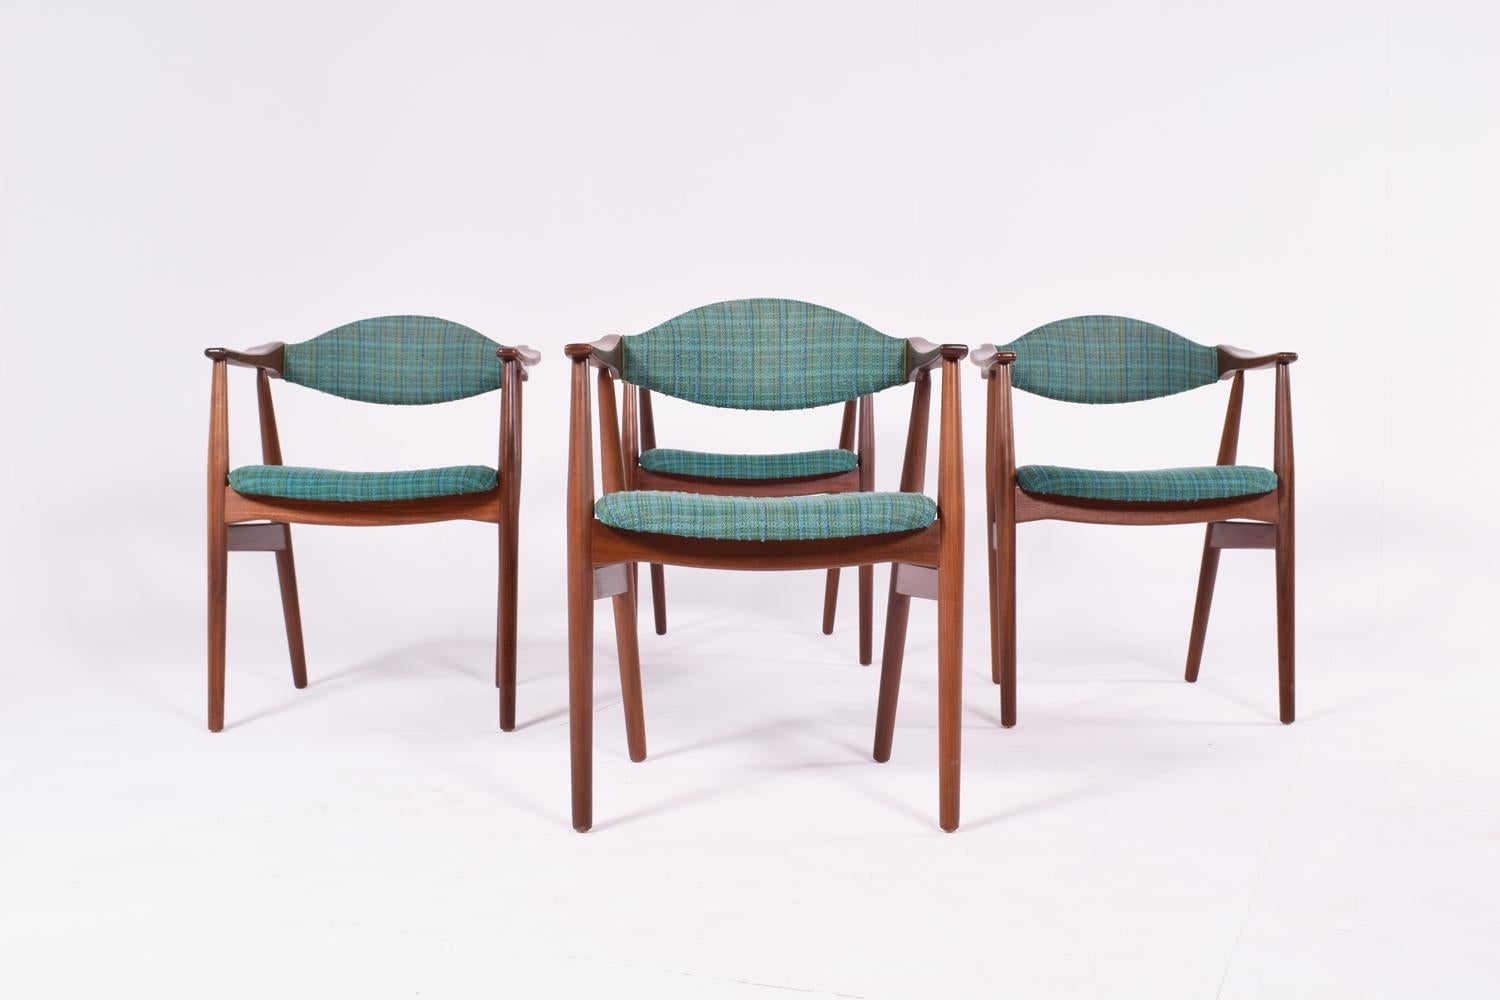 Set of 4 armchairs in teak. Original wrapper with fabric upholstery on seat and back. Made in Denmark.
Comfortable and elegant design. Great joinery and arm detail. Fluid design between the back and the arms.